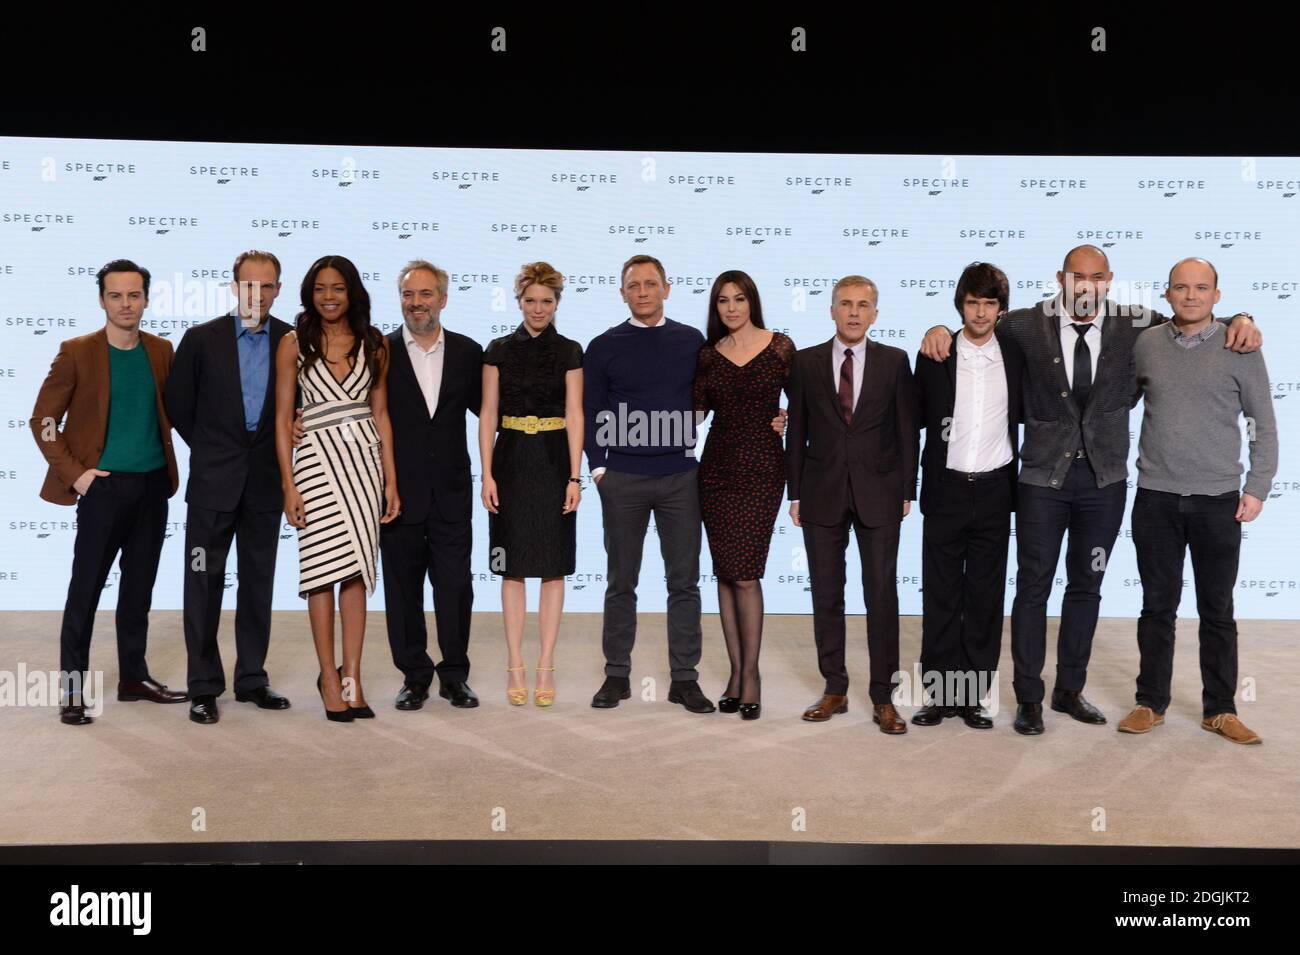 (L-R) Andrew Scott, Ralph Fiennes, Naomie Harris, Sam Mendes, Lea Seydoux, Daniel Craig, Monica Bellucci, Christoph Waltz, Ben Whishaw, Dave Bautista and Rory Kinnear attend the BOND 24 live announcement to mark the start of production on the 24th Bond film held at Pinewood Studios, London   The title and cast of the 24th Bond film were revealed, marking the start of principal photography on Monday 8th December Stock Photo